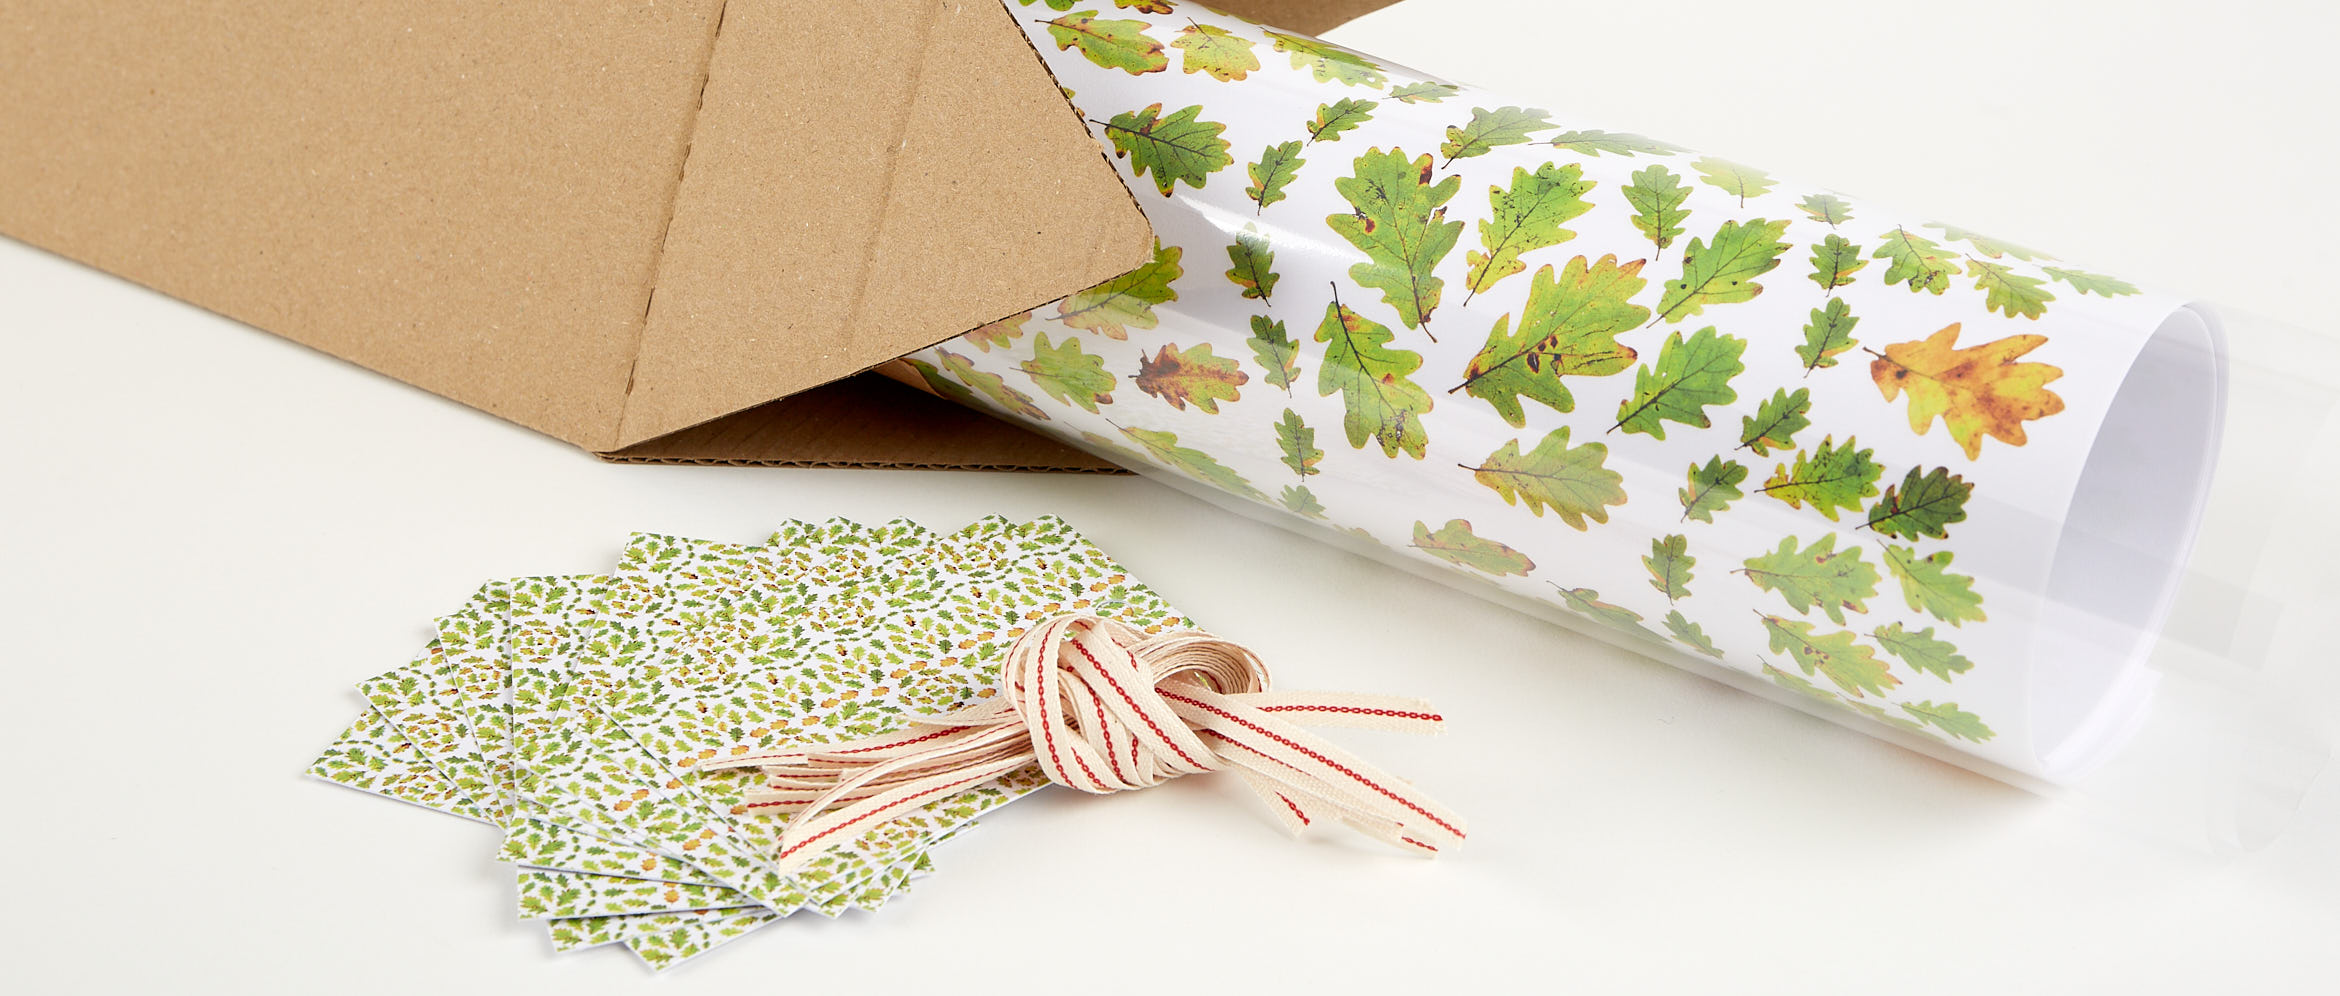 Wrapping paper and gift tags - designs from nature